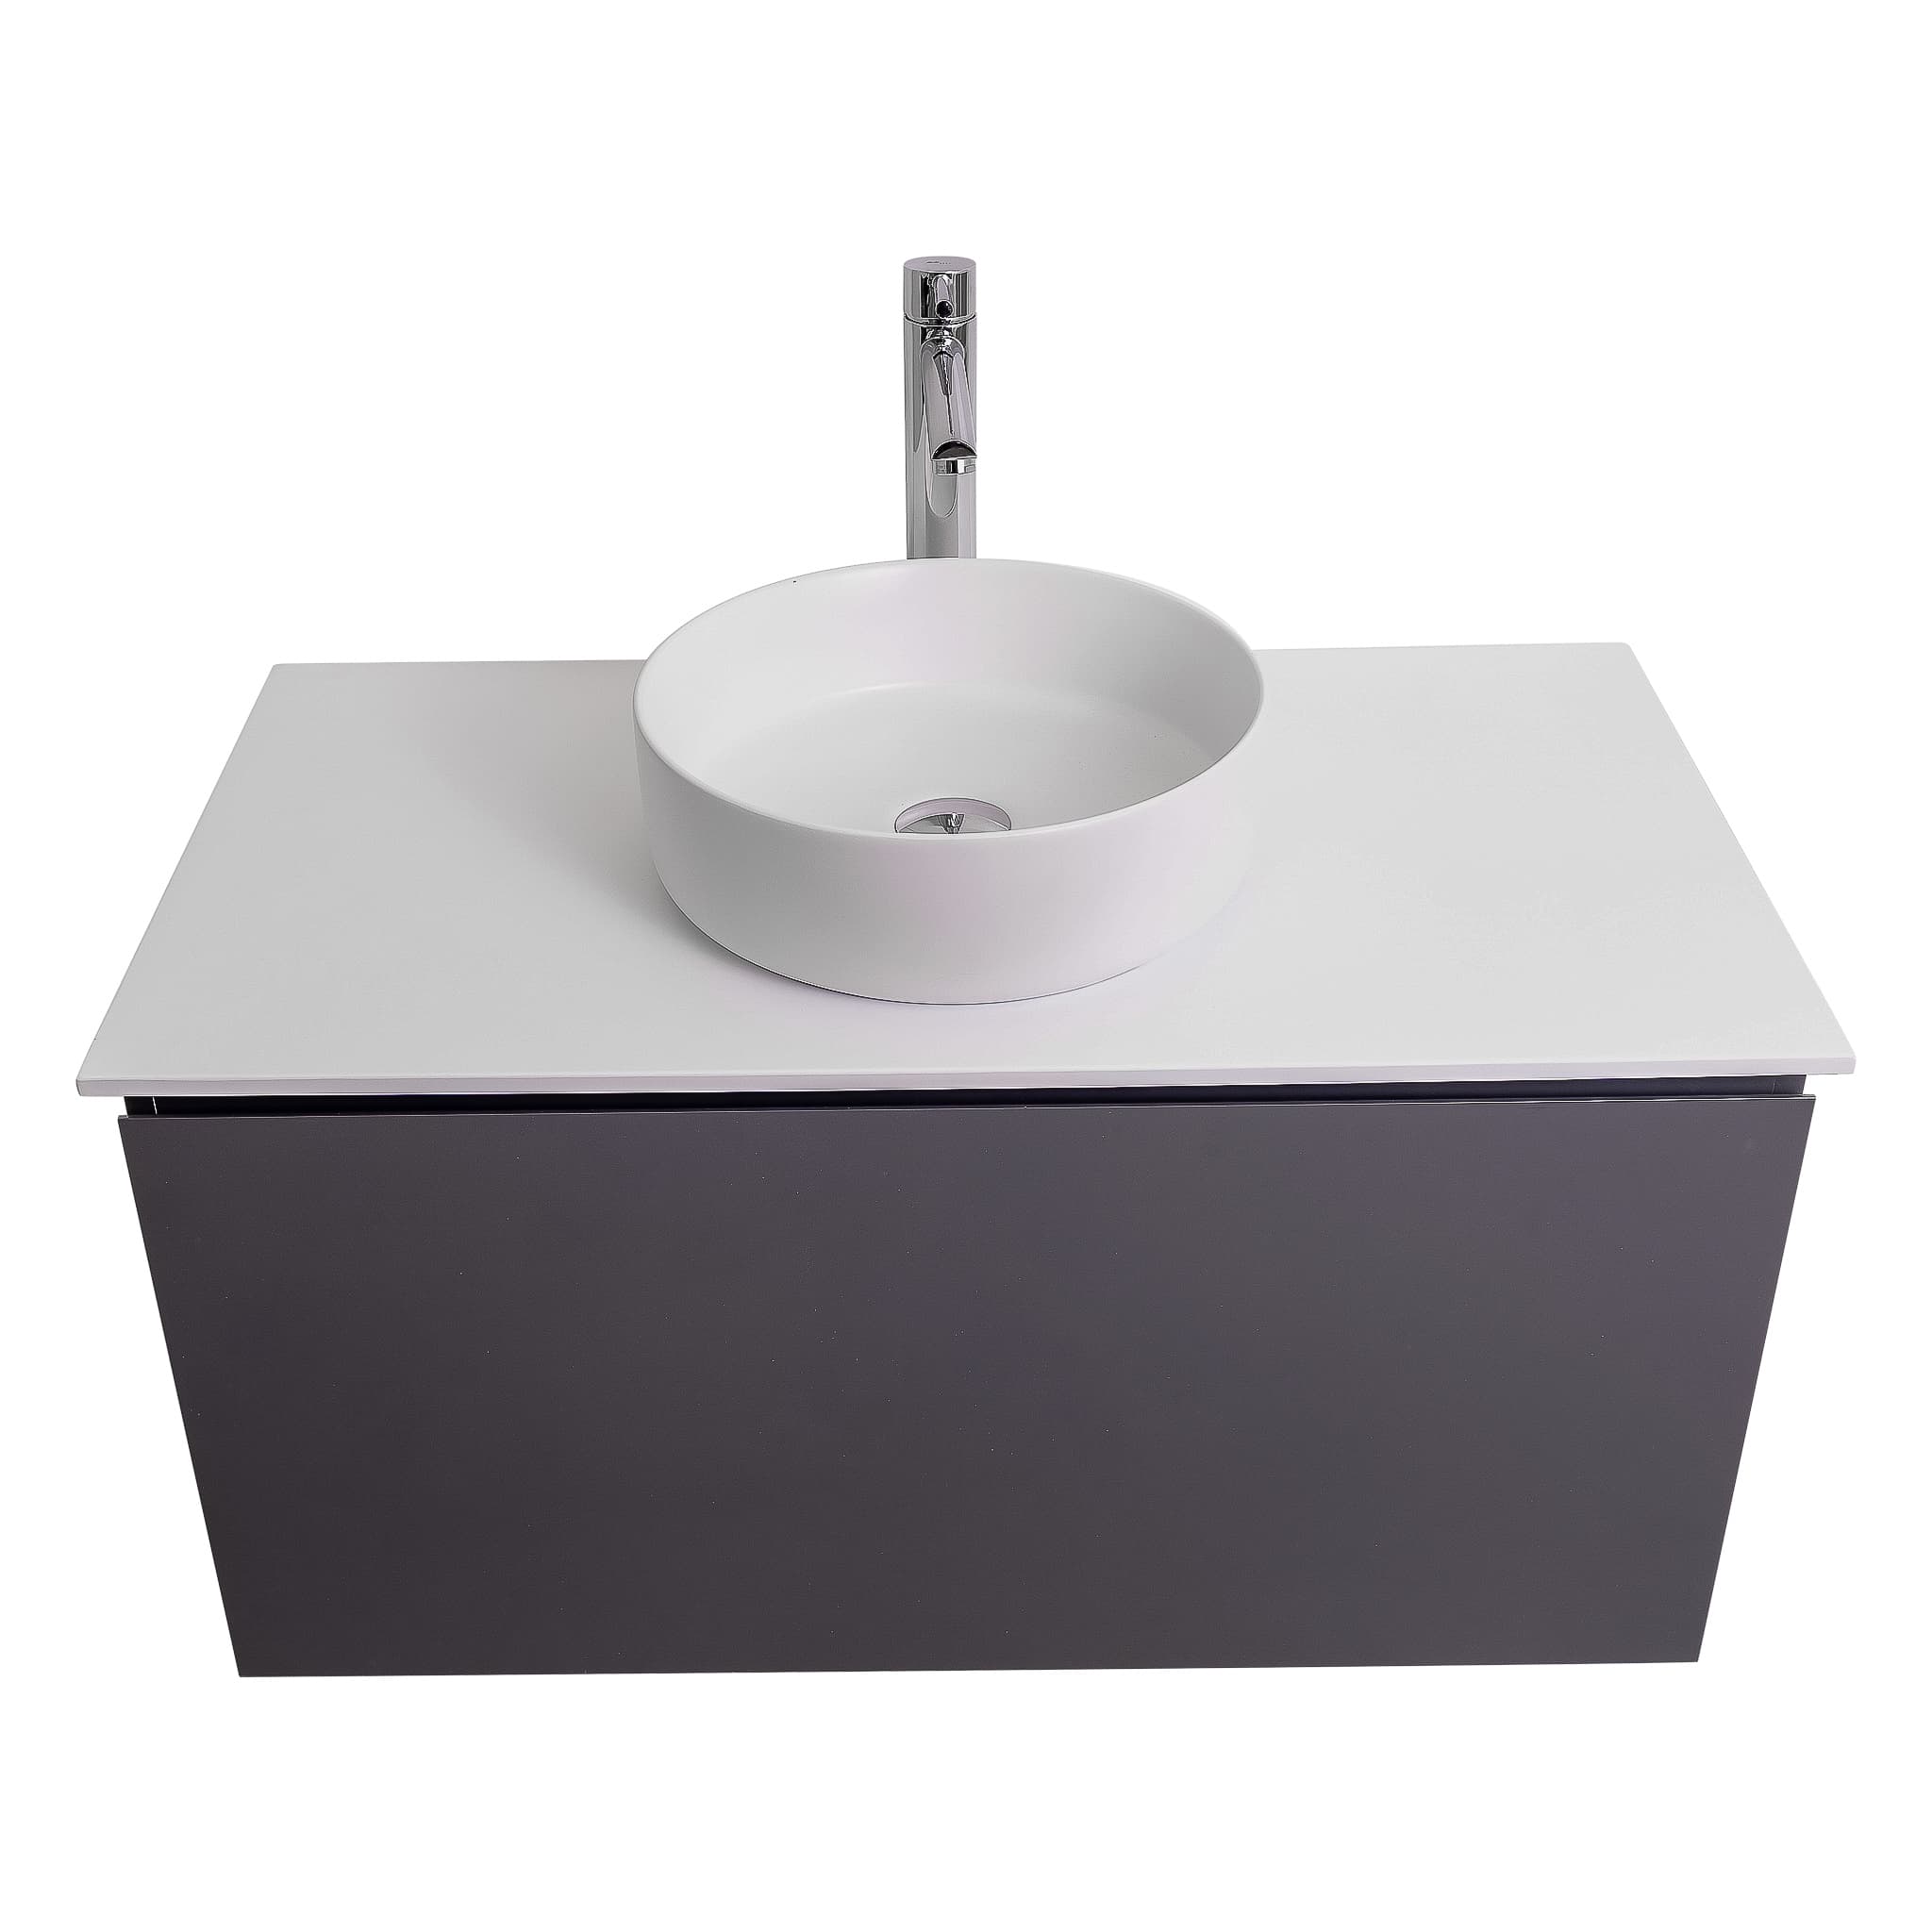 Venice 39.5 Anthracite High Gloss Cabinet, Ares White Top And Ares White Ceramic Basin, Wall Mounted Modern Vanity Set